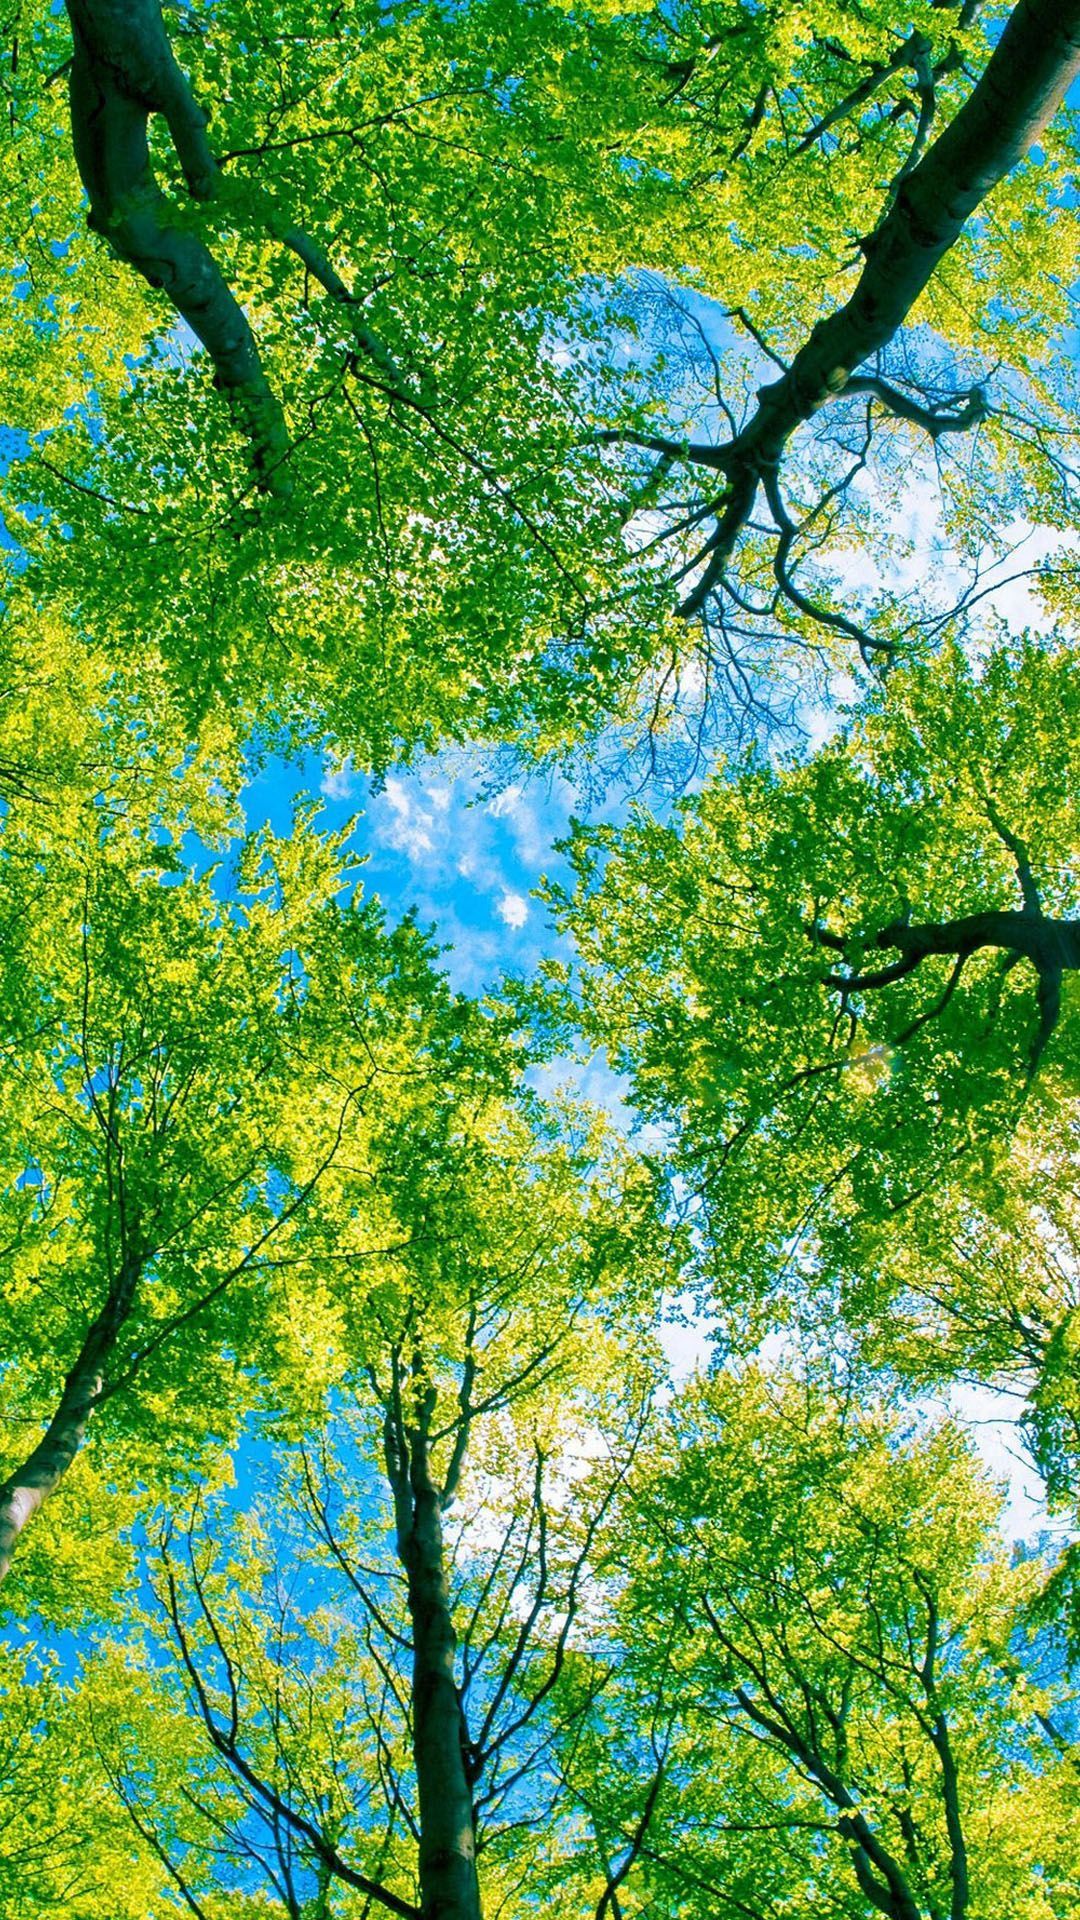 Under Green Trees htc one wallpaper. Nature iphone wallpaper, Green nature, Nature wallpaper